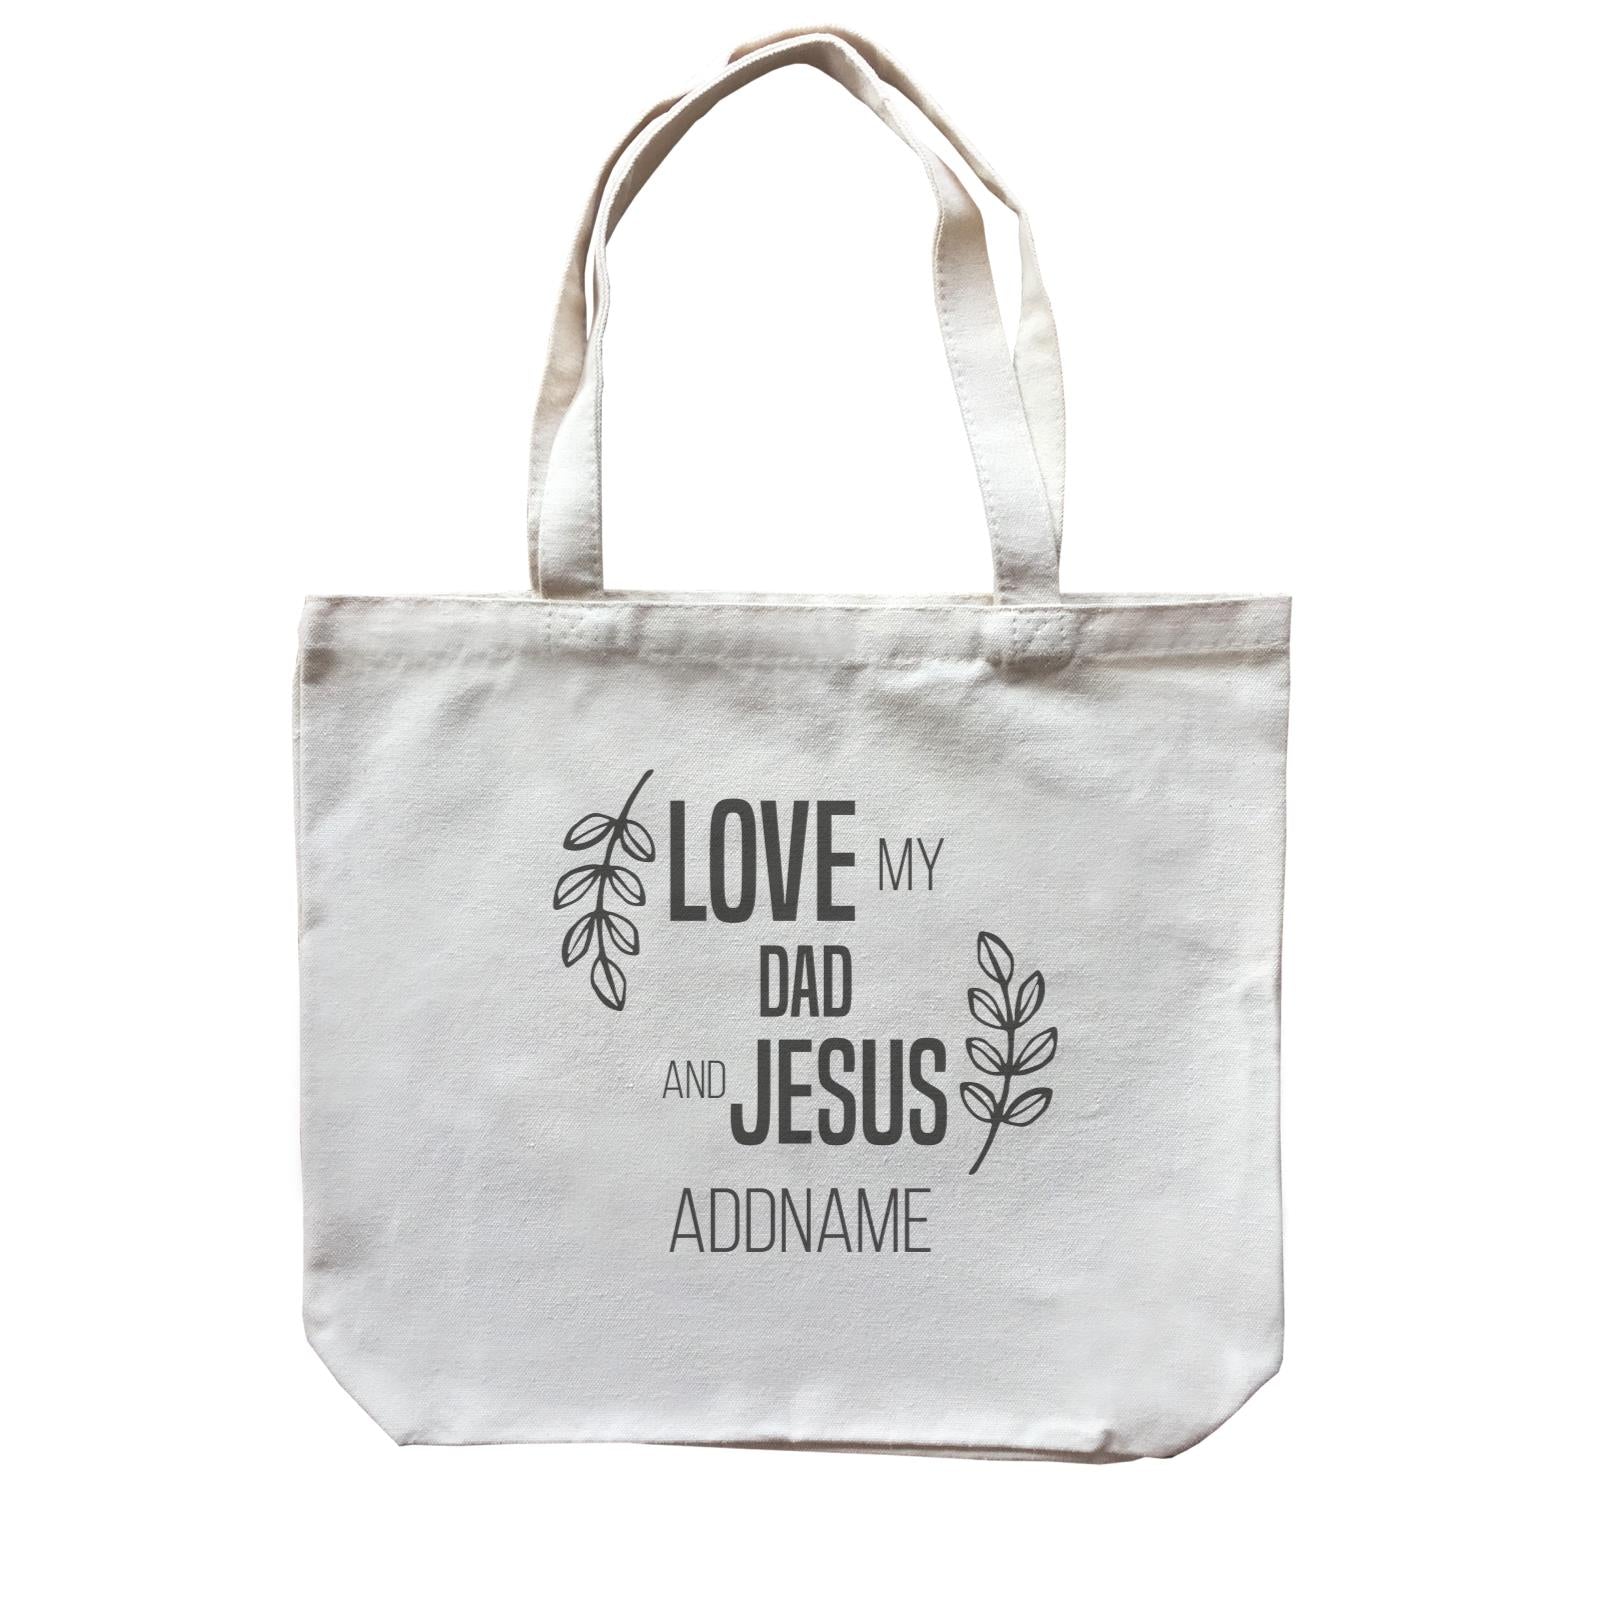 Christian Series Love My Dad And Jesus Addname Canvas Bag